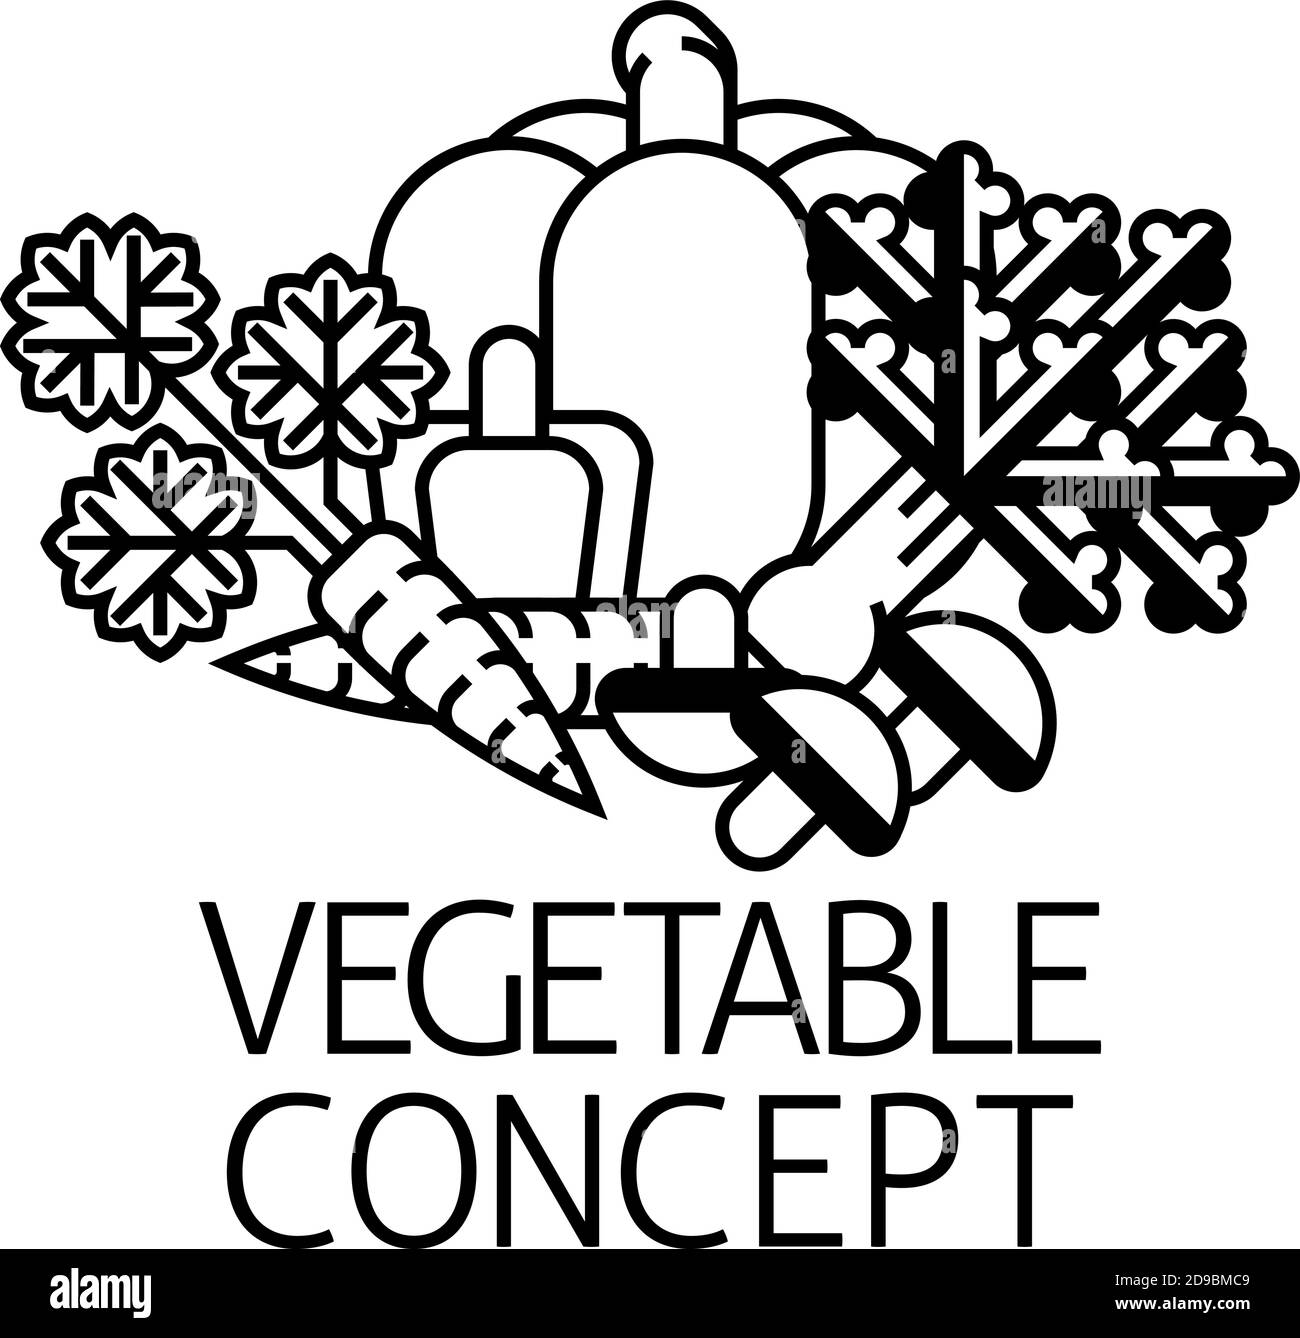 Vegetable Sign Label Icon Concept Stock Vector